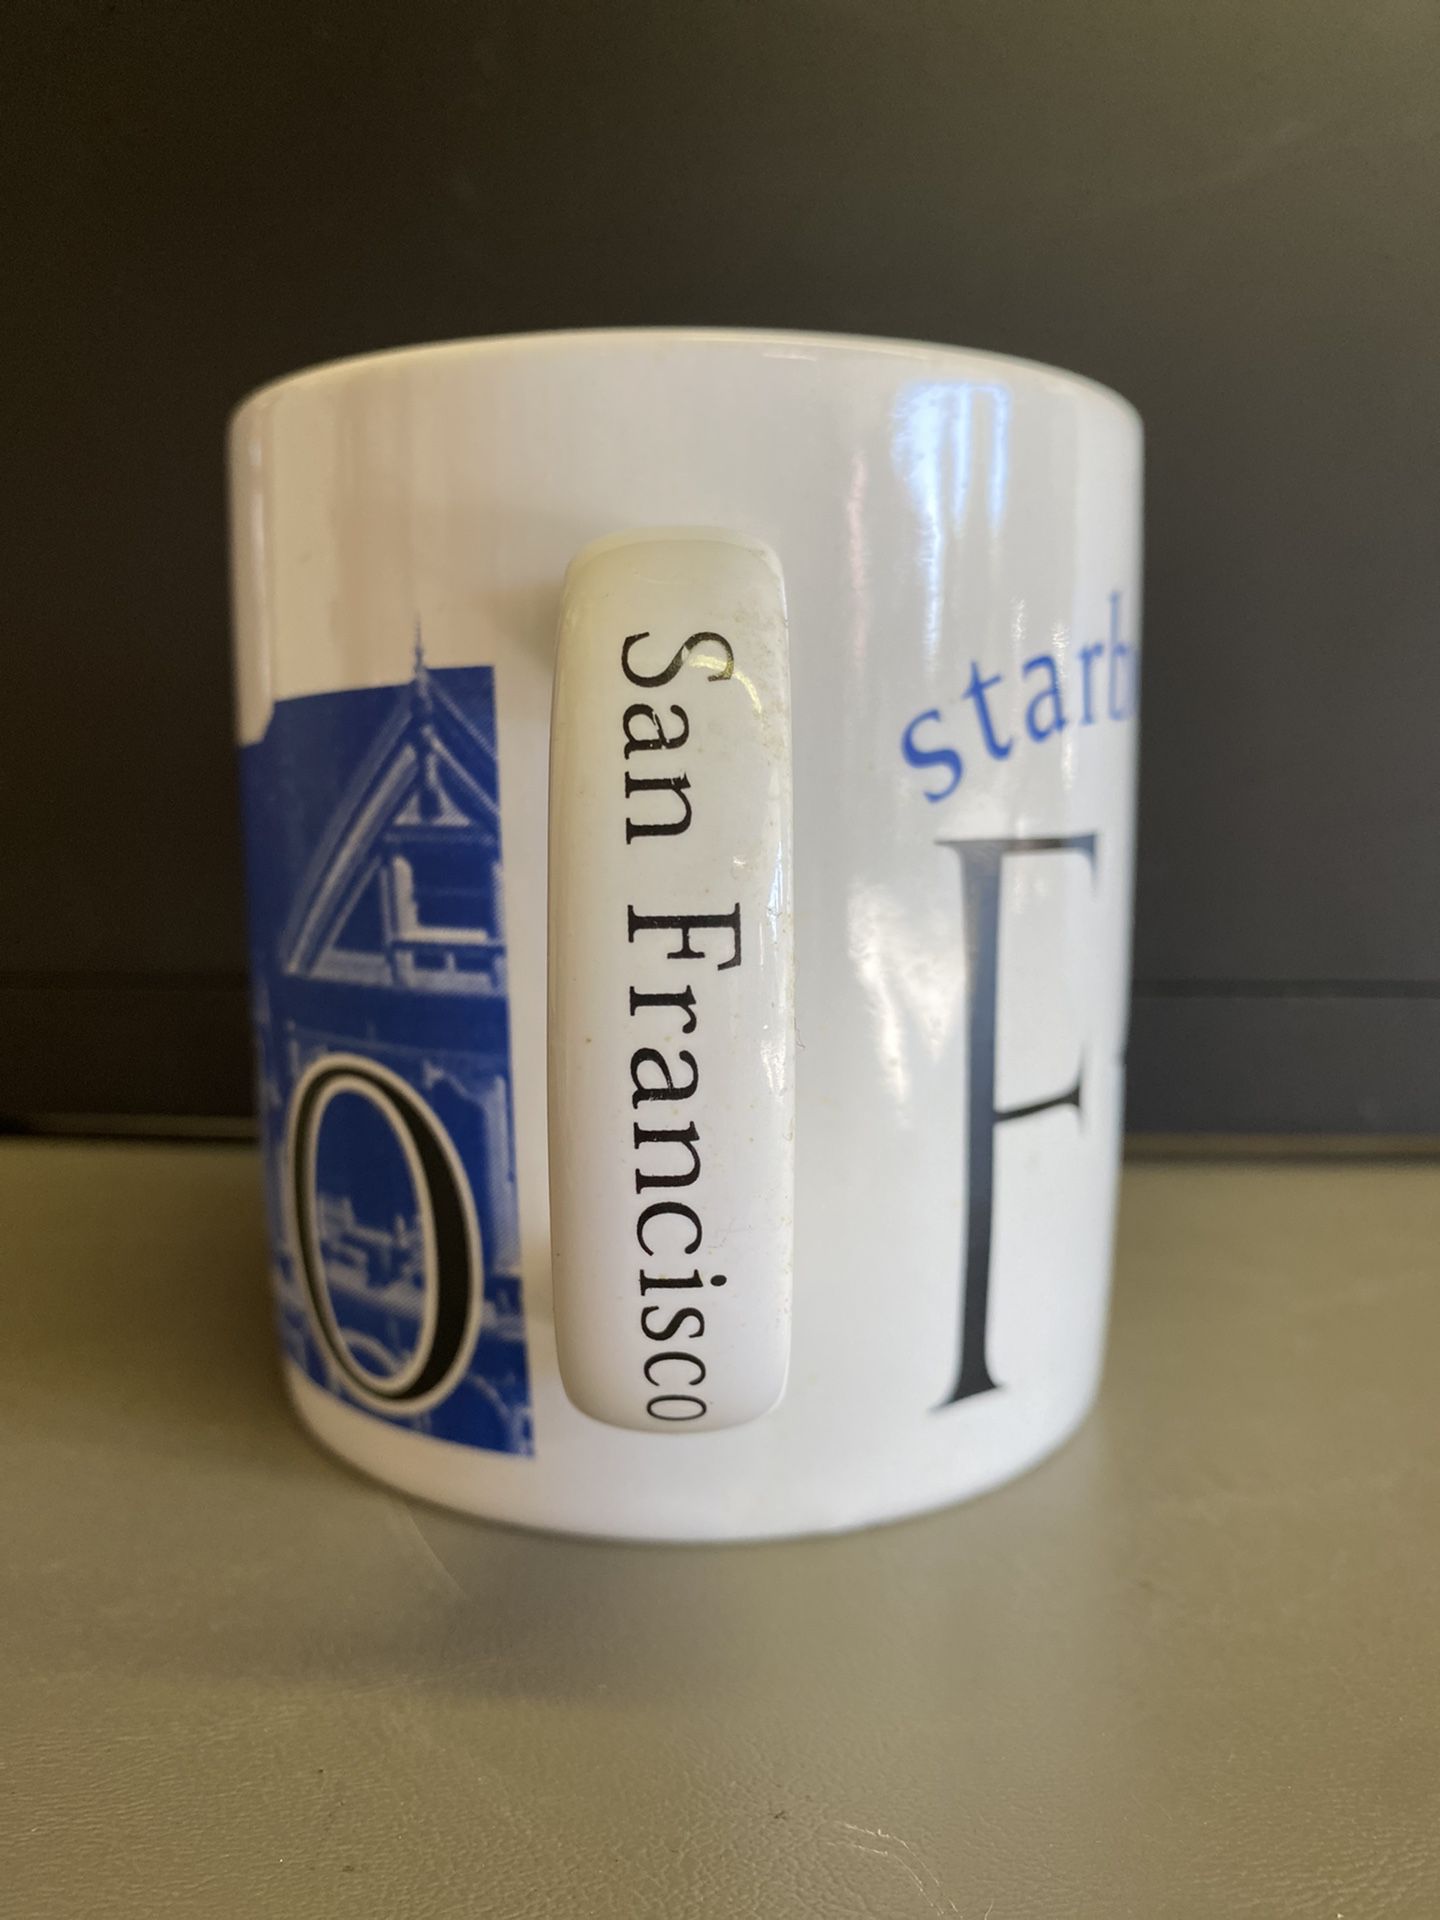 San Francisco Starbucks Coffee Cup City Mug Collector Series Made in Thailand 1994